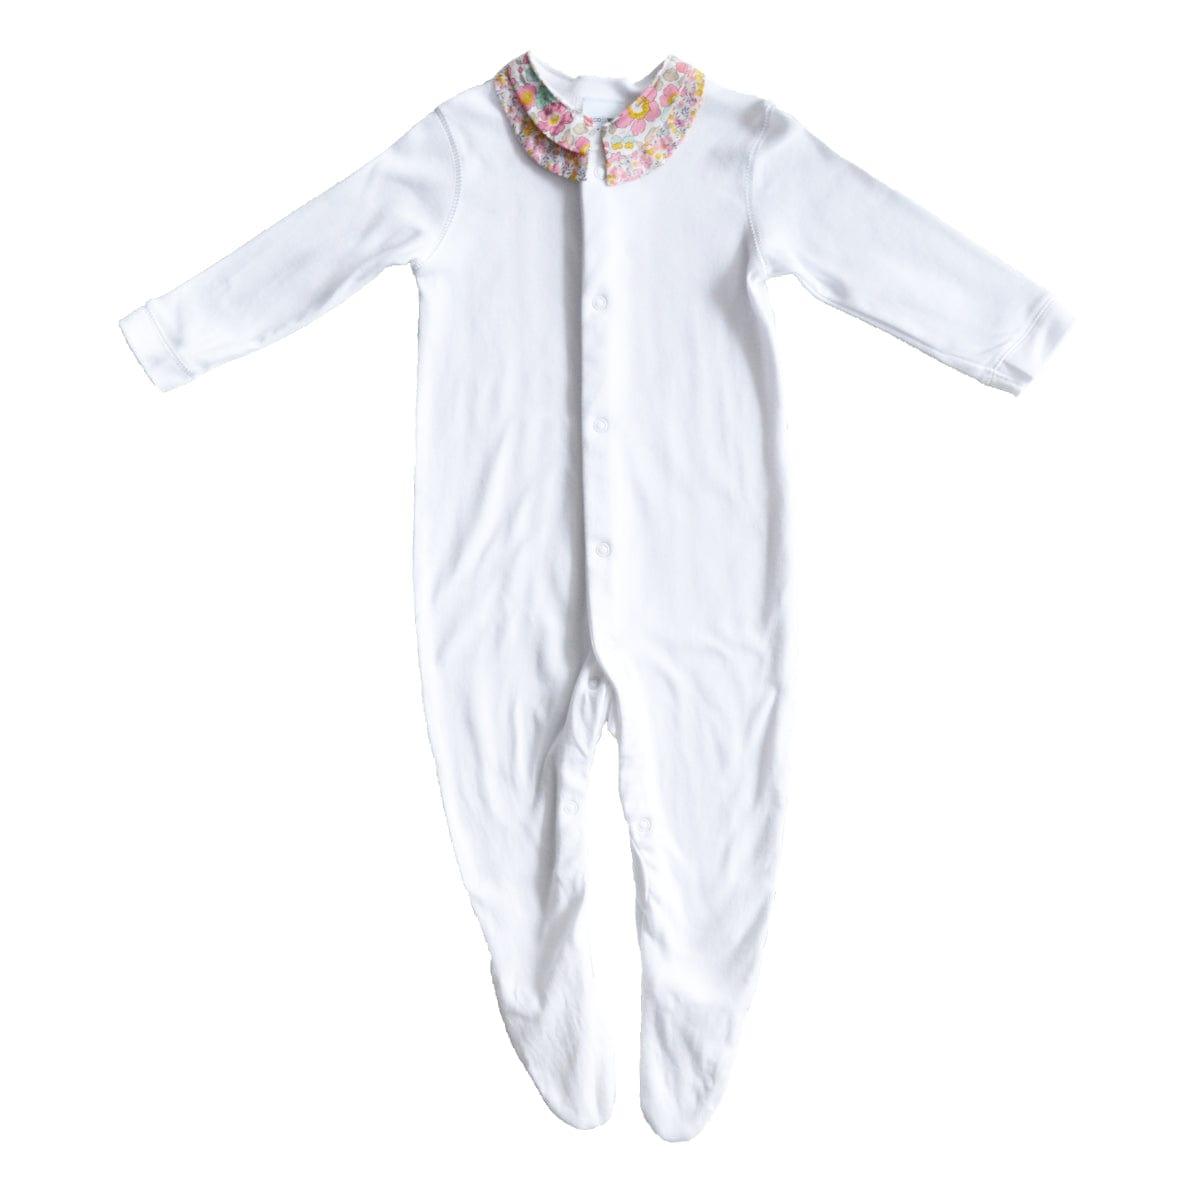 Double Collar Baby-grow made with Liberty Fabric BETSY ROSE & WILTSHIRE BUD - Coco & Wolf